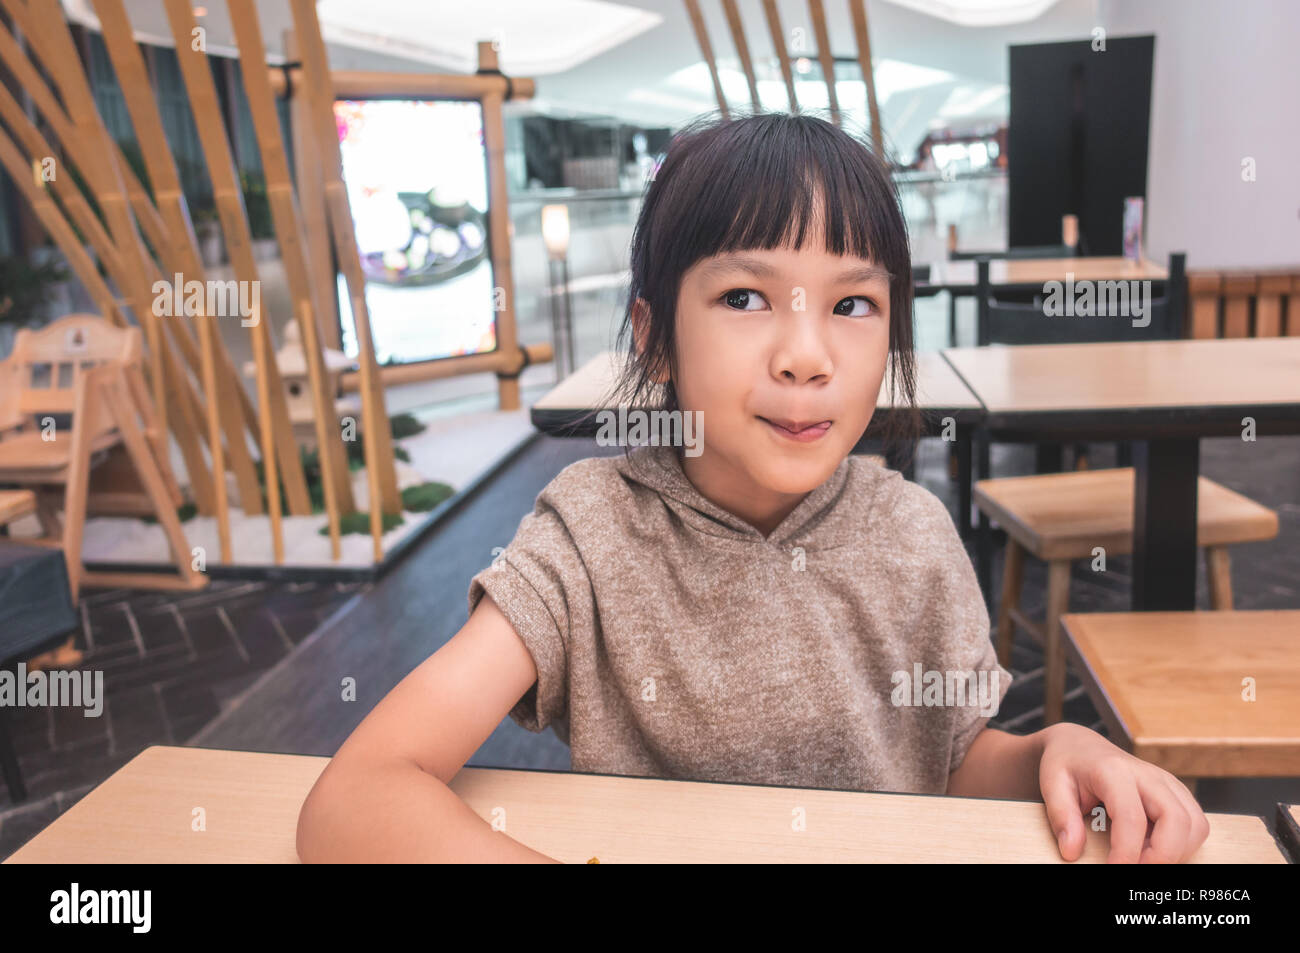 Hungry Funny child licking her lip waiting for food in restaurant. Stock Photo